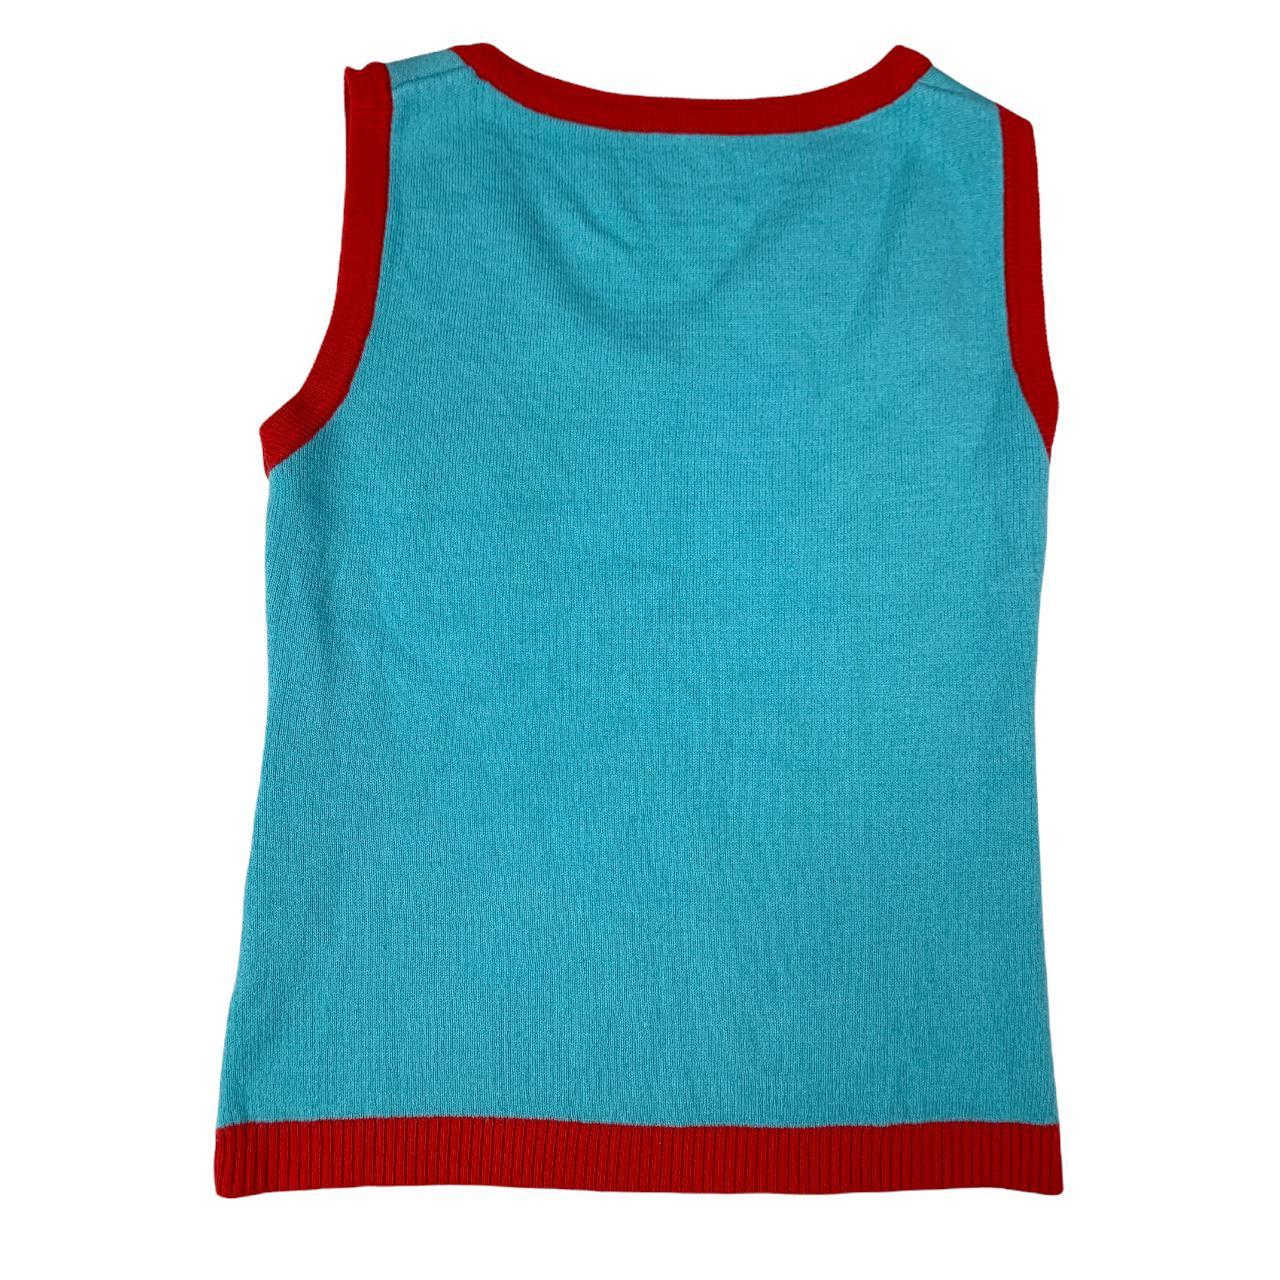 Product Image 3 - PENGUIN SWEATER VEST

This Christmas penguin